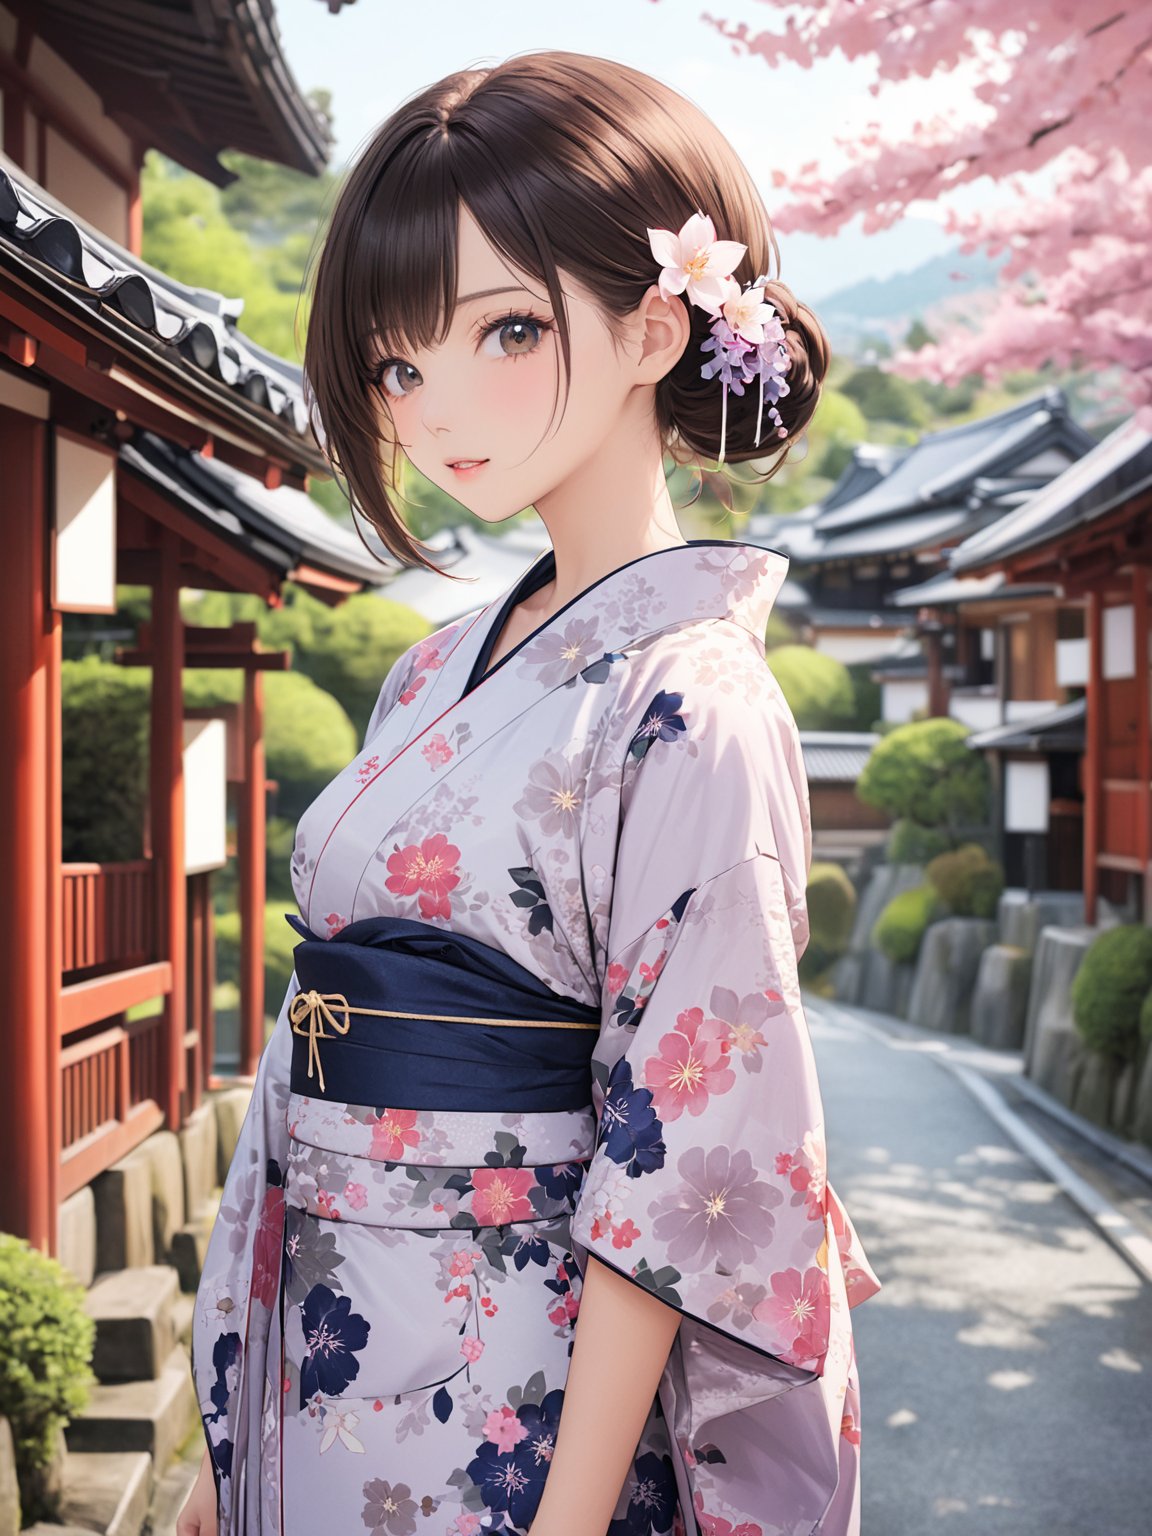 //Quality,
photo r3al, detailmaster2, masterpiece, photorealistic, 8k, 8k UHD, best quality, ultra realistic, ultra detailed, hyperdetailed photography, real photo, 
,//Character,
1girl, solo, cowboy_shot, looking_at_viewer, , 
,//Fashion,
kimono,
,//Background,
Kyoto, outdoors
,//Others,
Eimi, goodbye